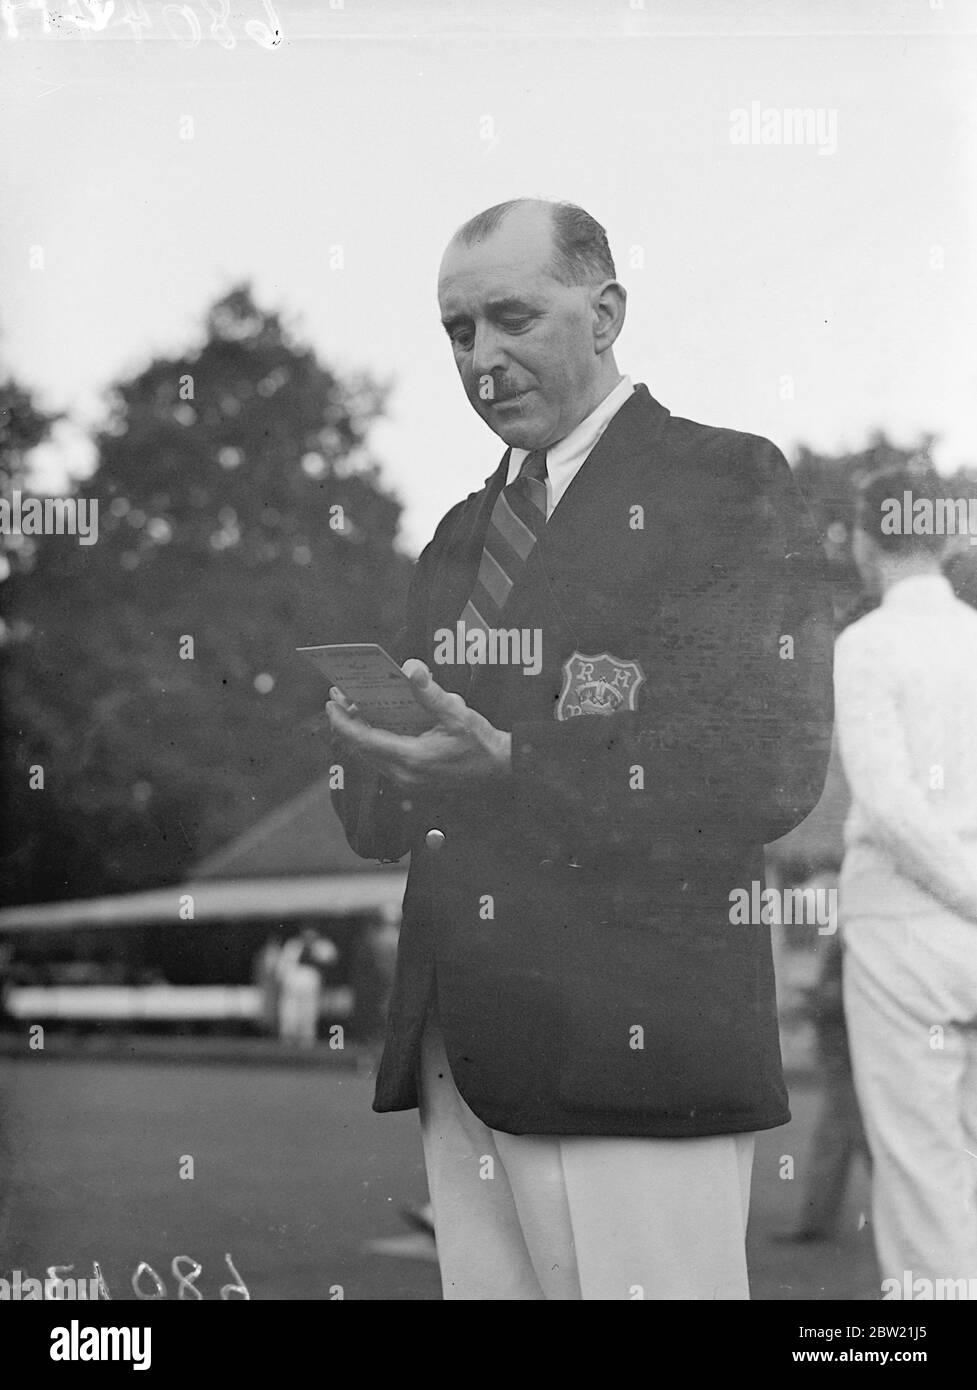 Mr J Watson, M.C a choriater in St George's Chapel altering the scoreboard at the Royal household Bowling club of Windsor Castle, membership of which is confined to persons in the Royal services. They played a match against the Australian team in the grounds of Windsor Castle. During their visit members of the Australian team had tea at the castle and were shown around the state apartments. 5 September 1937. Stock Photo